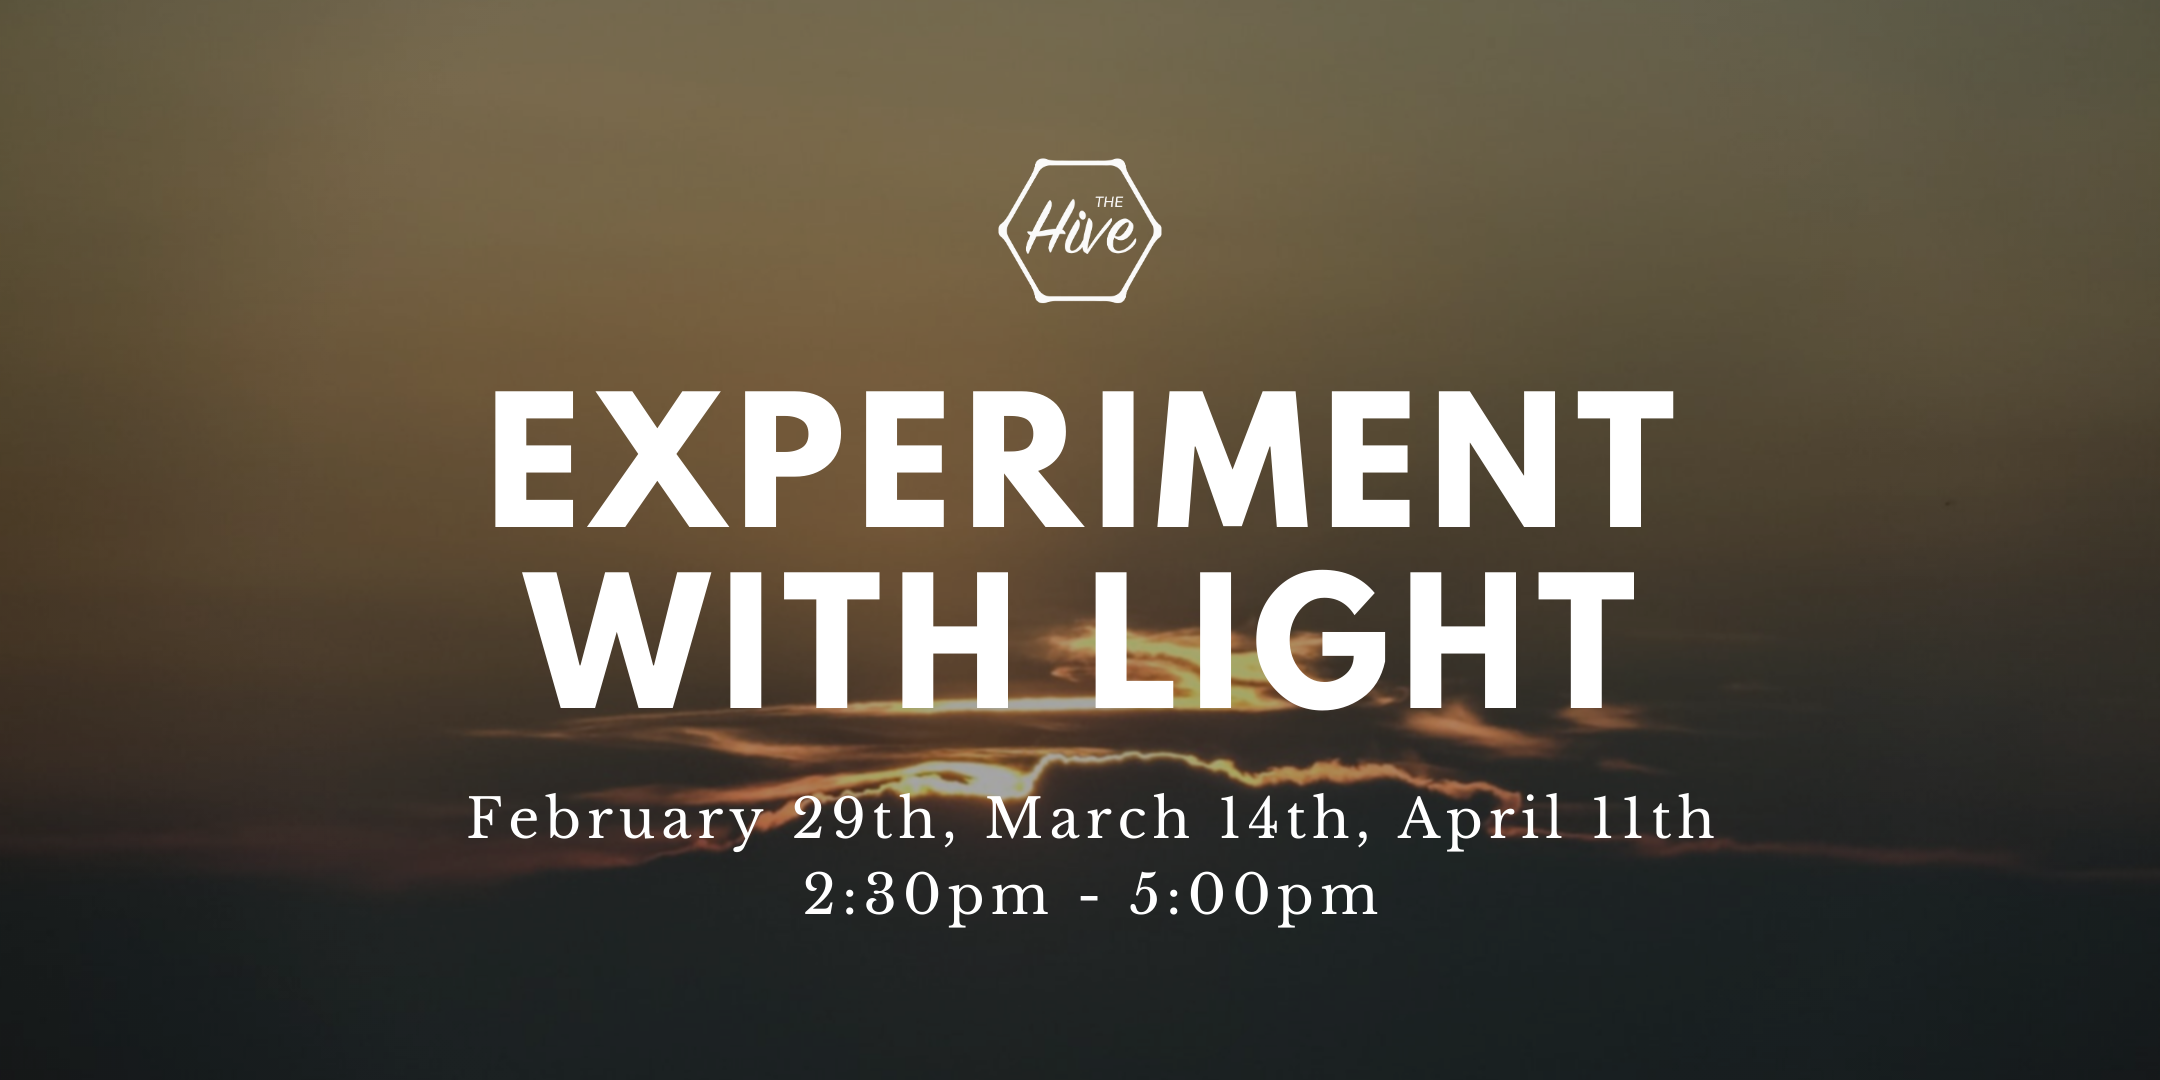 Experiment with Light: A Quaker Meditation Practice for Inner Guidance and Discernment